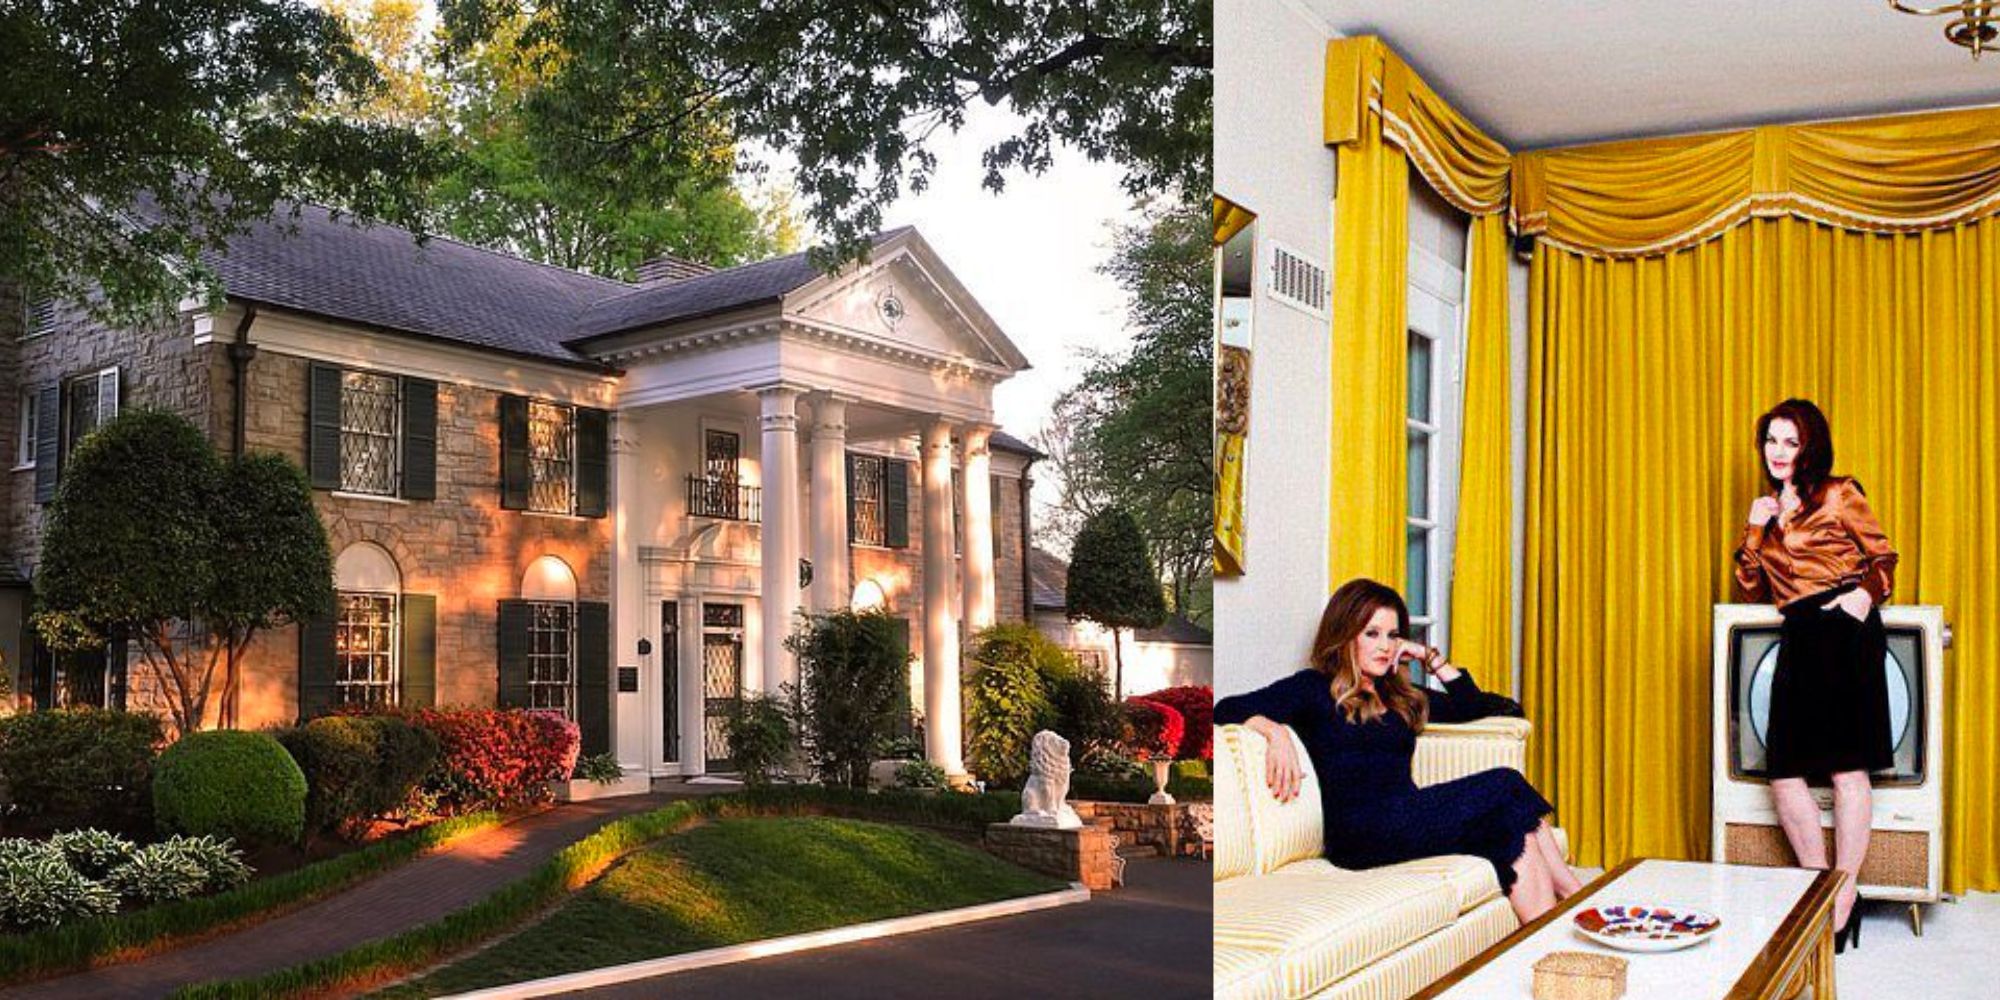 Graceland, Lisa Marie and Priscilla Presley in their home